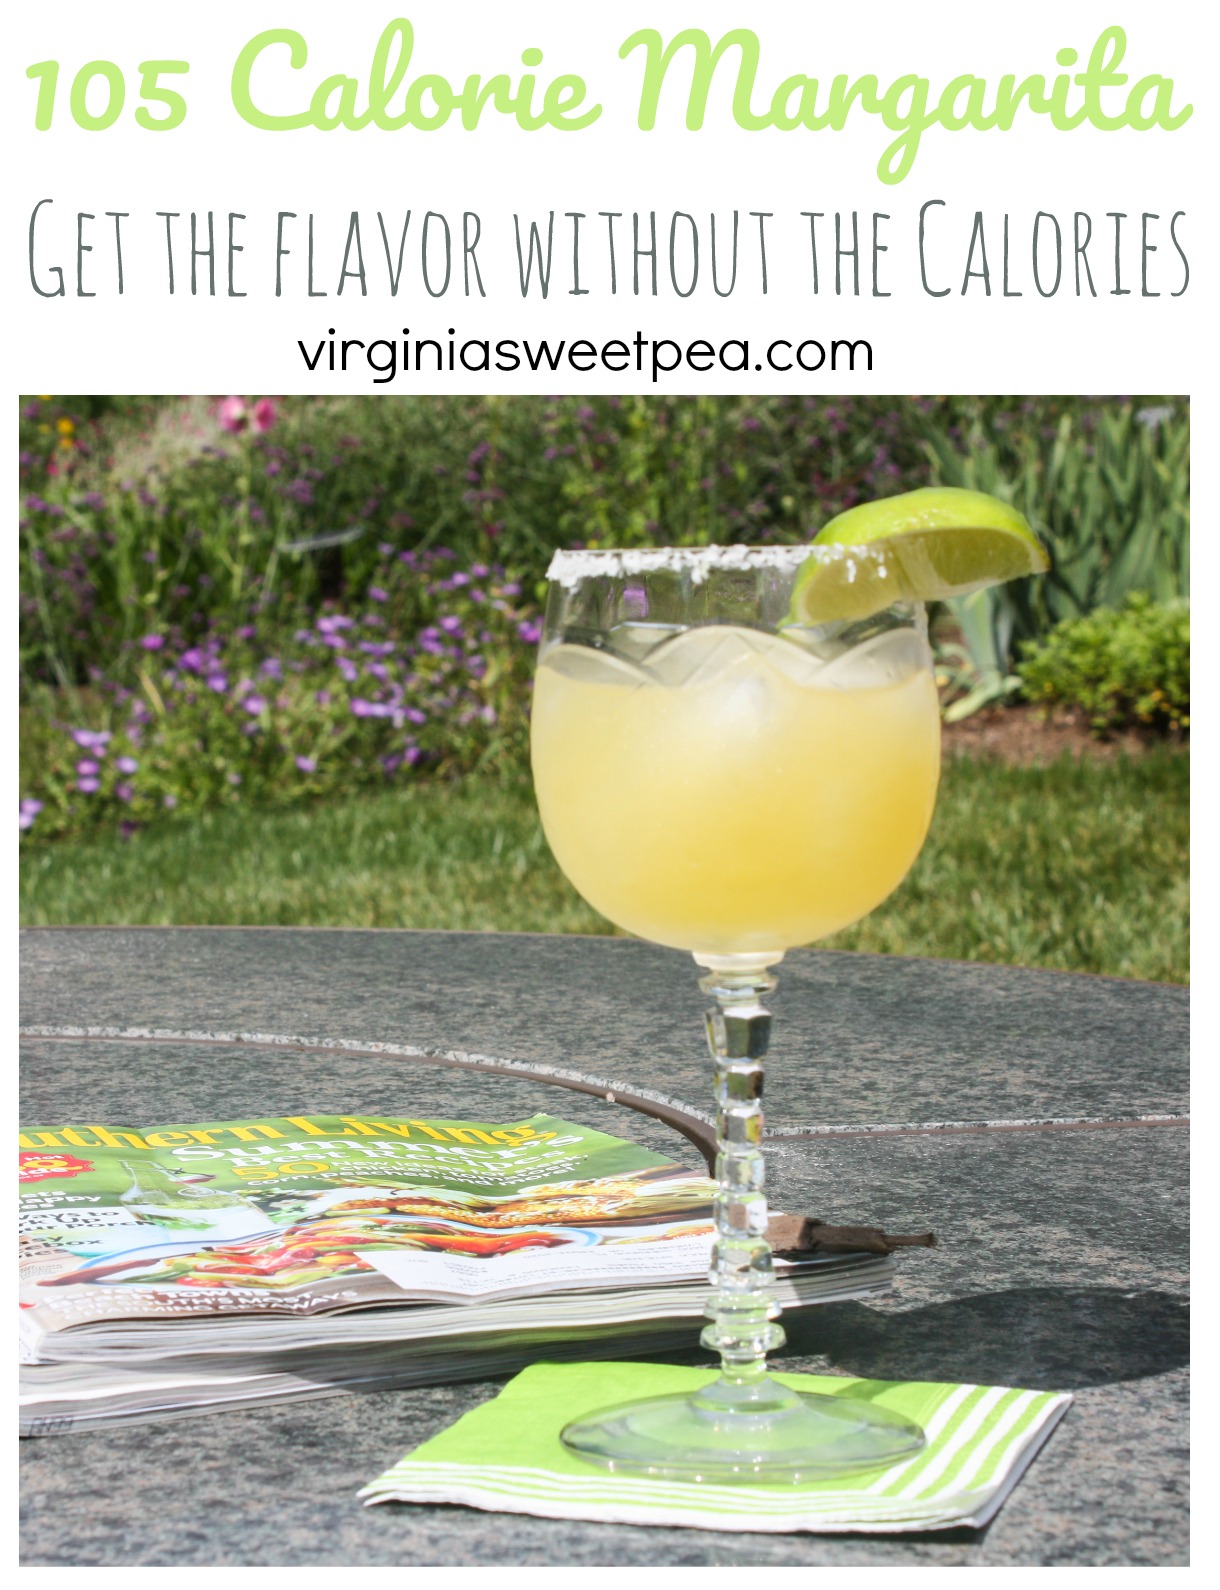 105 Calorie Margarita - Get the flavor without the calories. #margarita #cincodemayo #margaritas #tequila #cocktail #lowcaloriecocktail #happycincodemayo